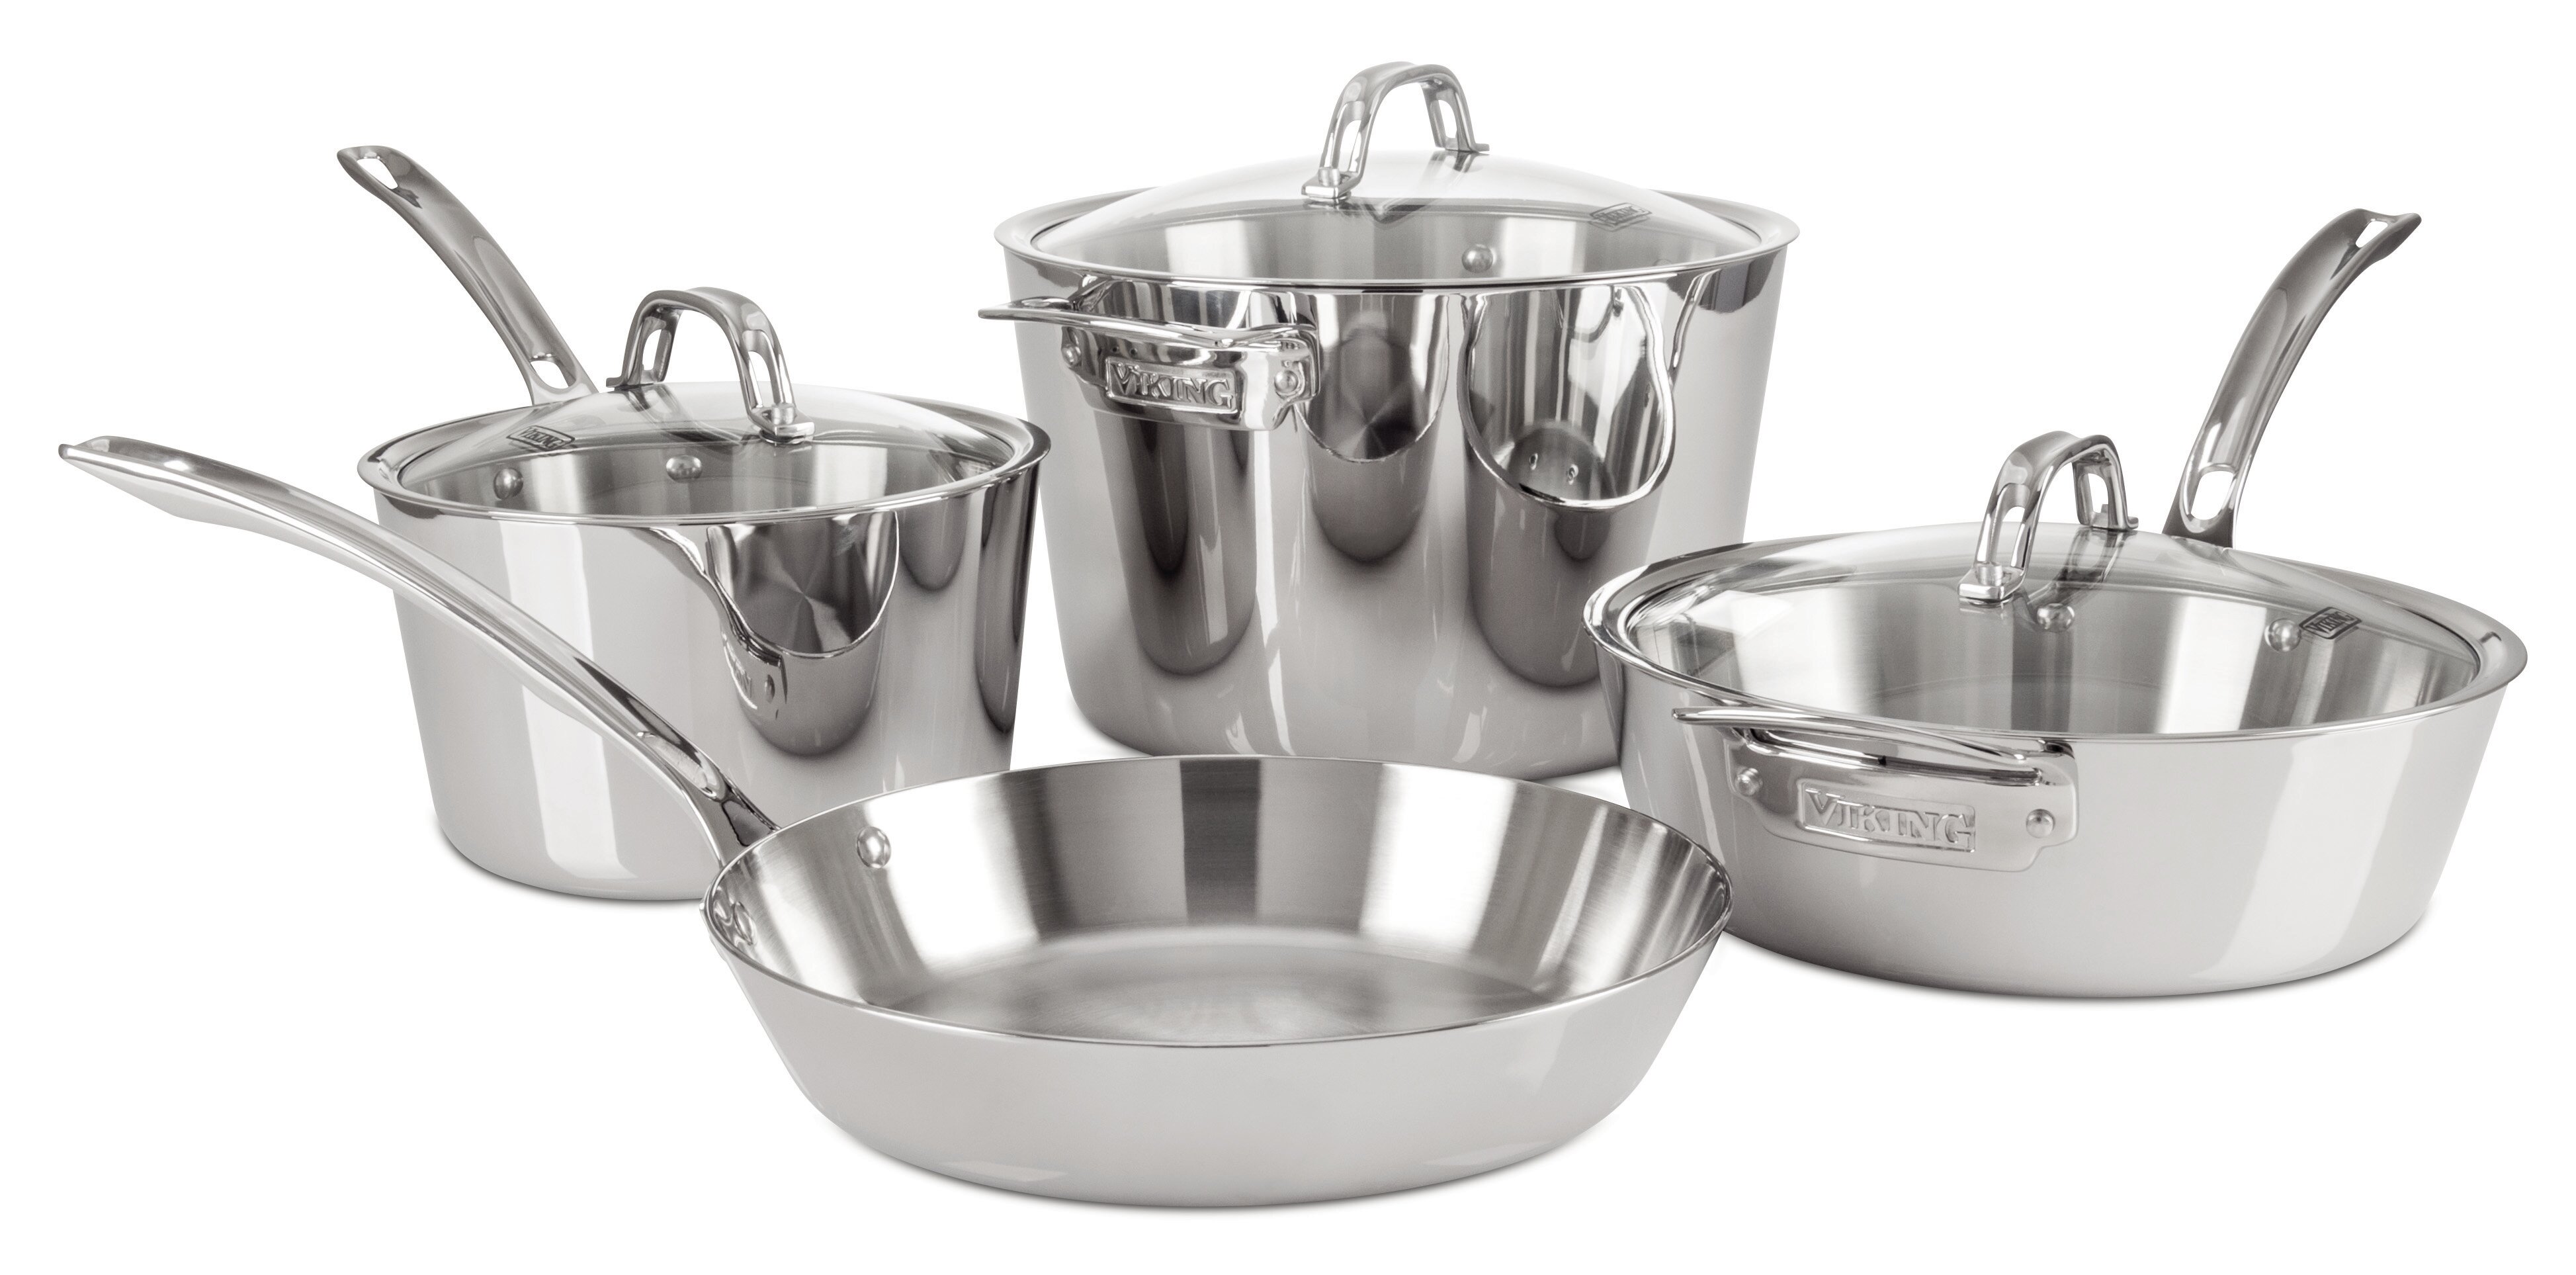 Viking Contemporary 3-Ply 12 Piece Cookware Set with Glass Lids